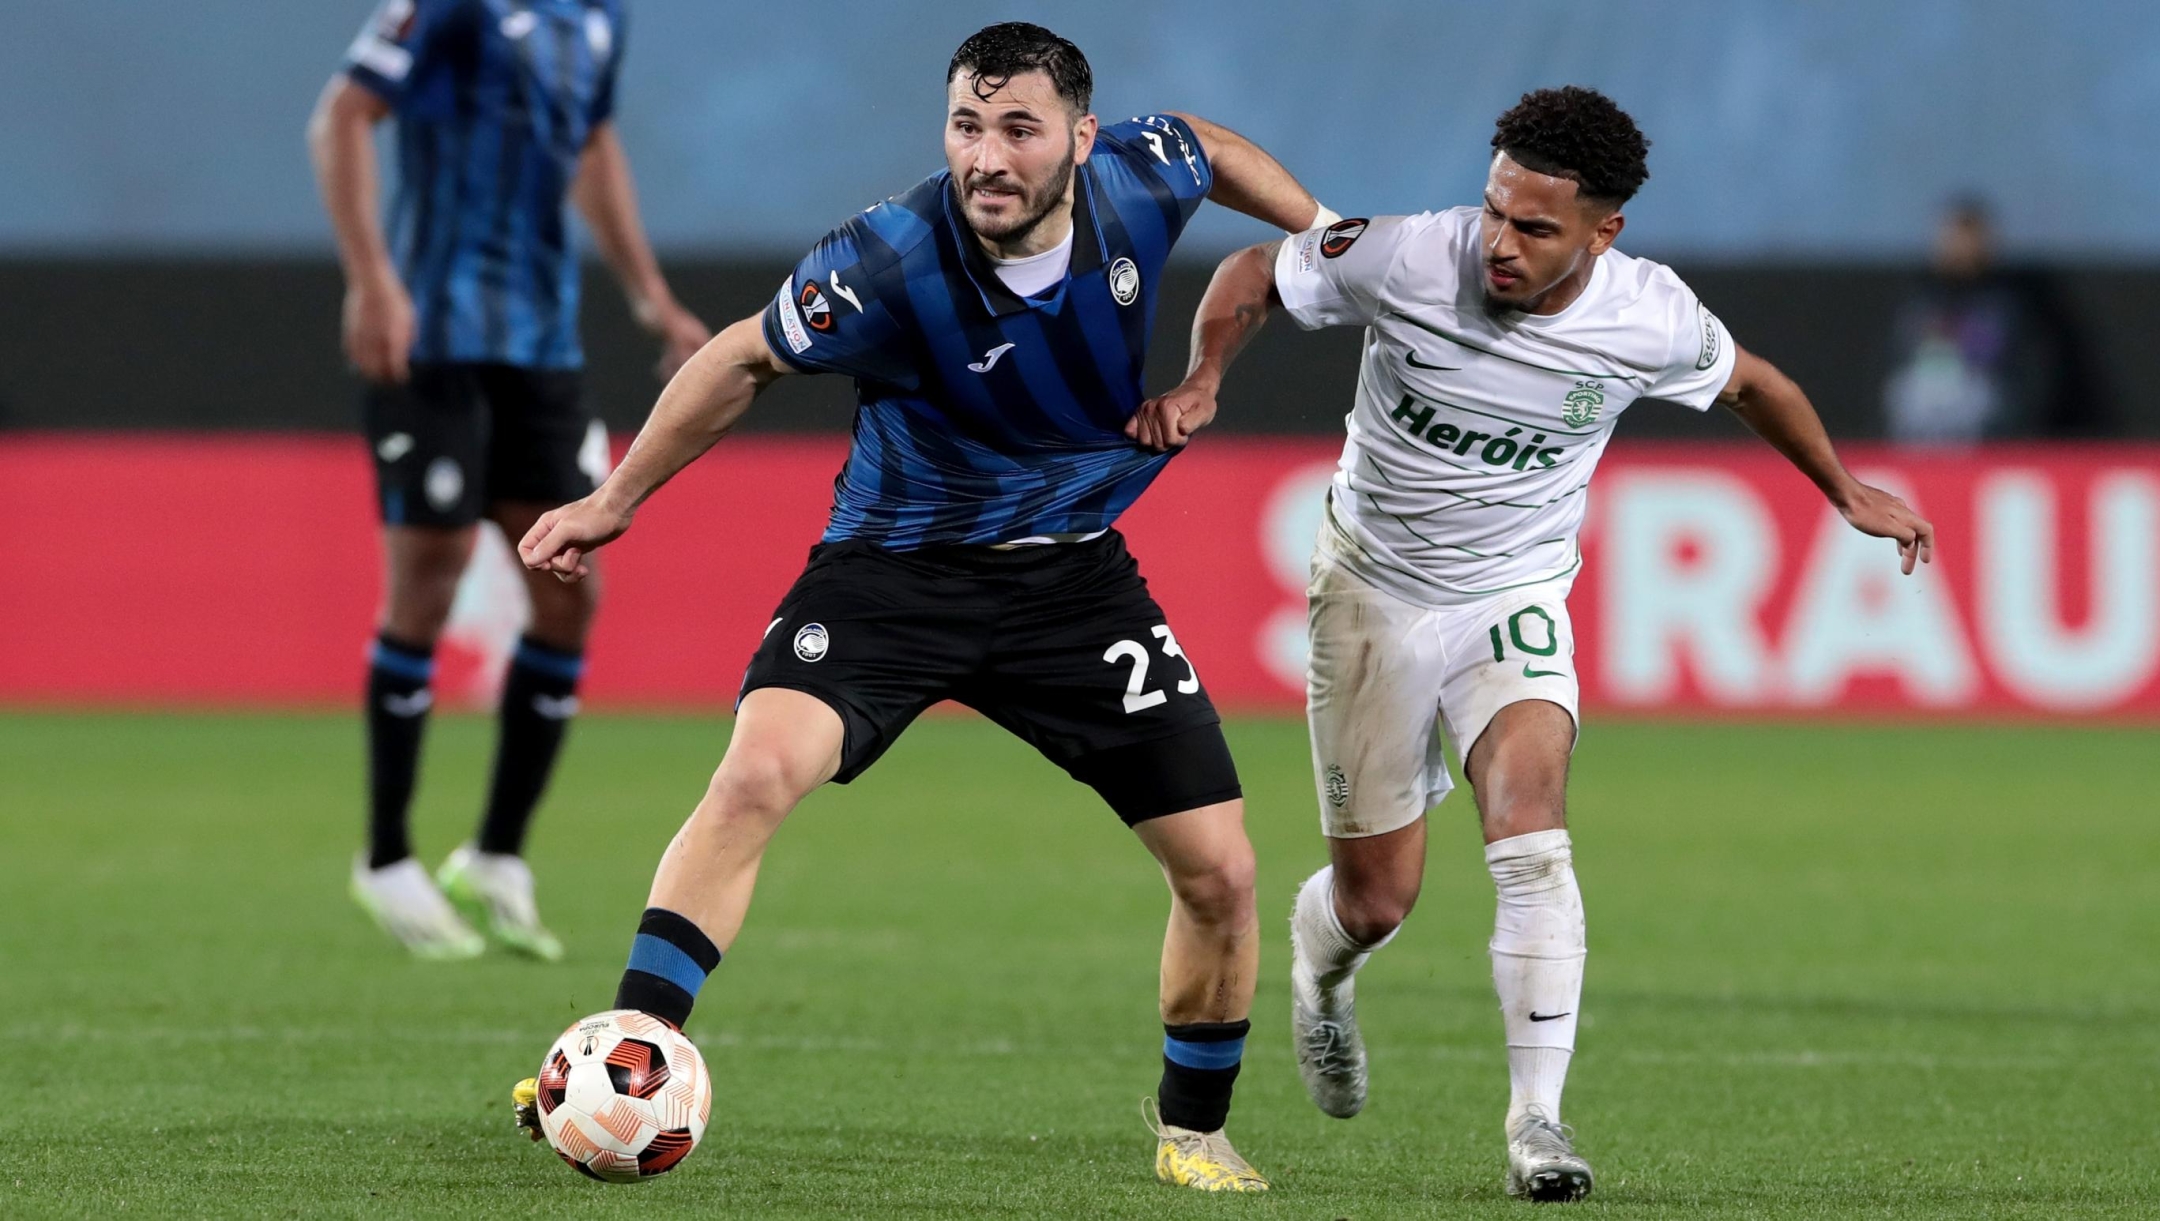 BERGAMO, ITALY - MARCH 14: Sead Kolasinac of Atalanta BC is challenged by Marcus Edwards of Sporting CP during the UEFA Europa League 2023/24 round of 16 second leg match between Atalanta and Sporting CP at the Stadio di Bergamo on March 14, 2024 in Bergamo, Italy. (Photo by Emilio Andreoli/Getty Images)